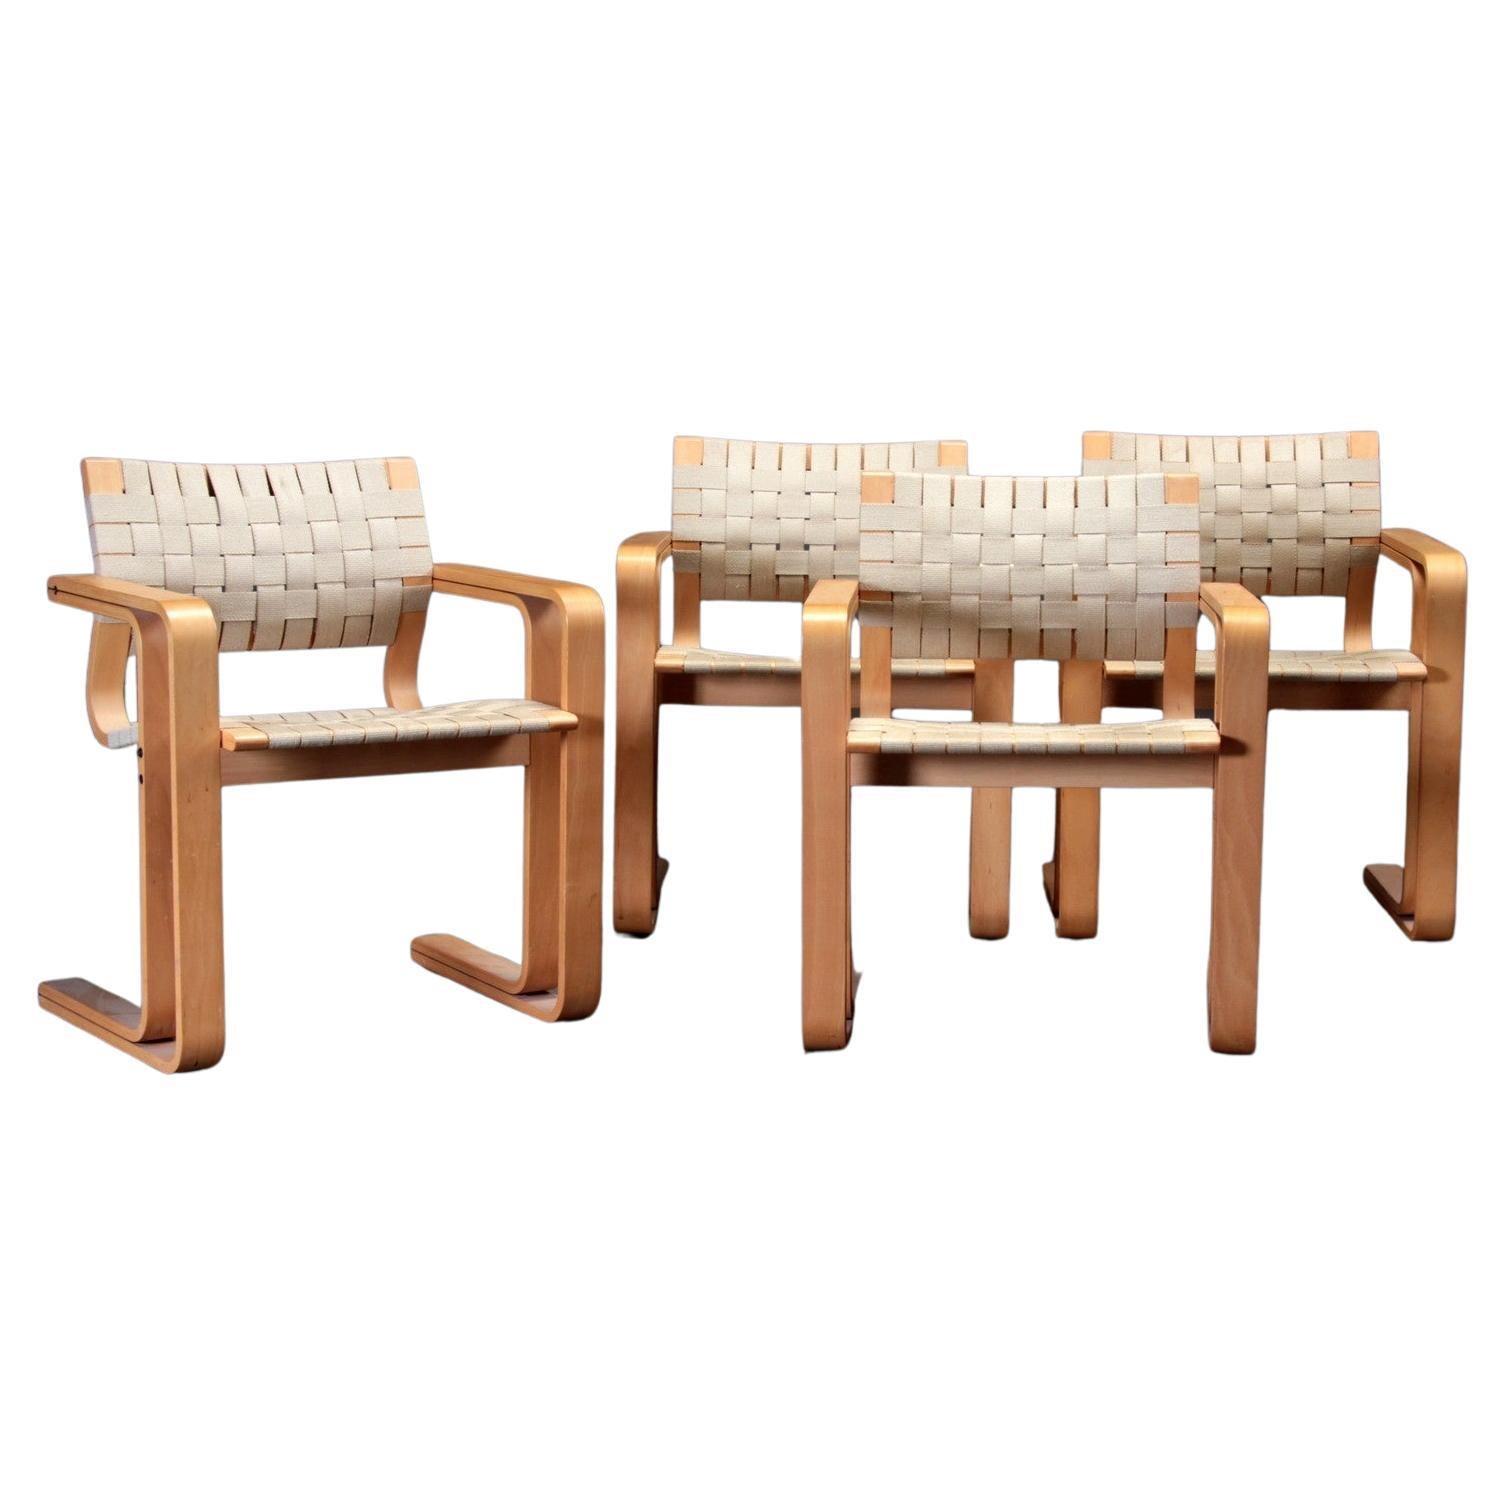 Four Chairs with Beech Armrests by Rud Thygesen and Johnny Sørensen, circa 1960